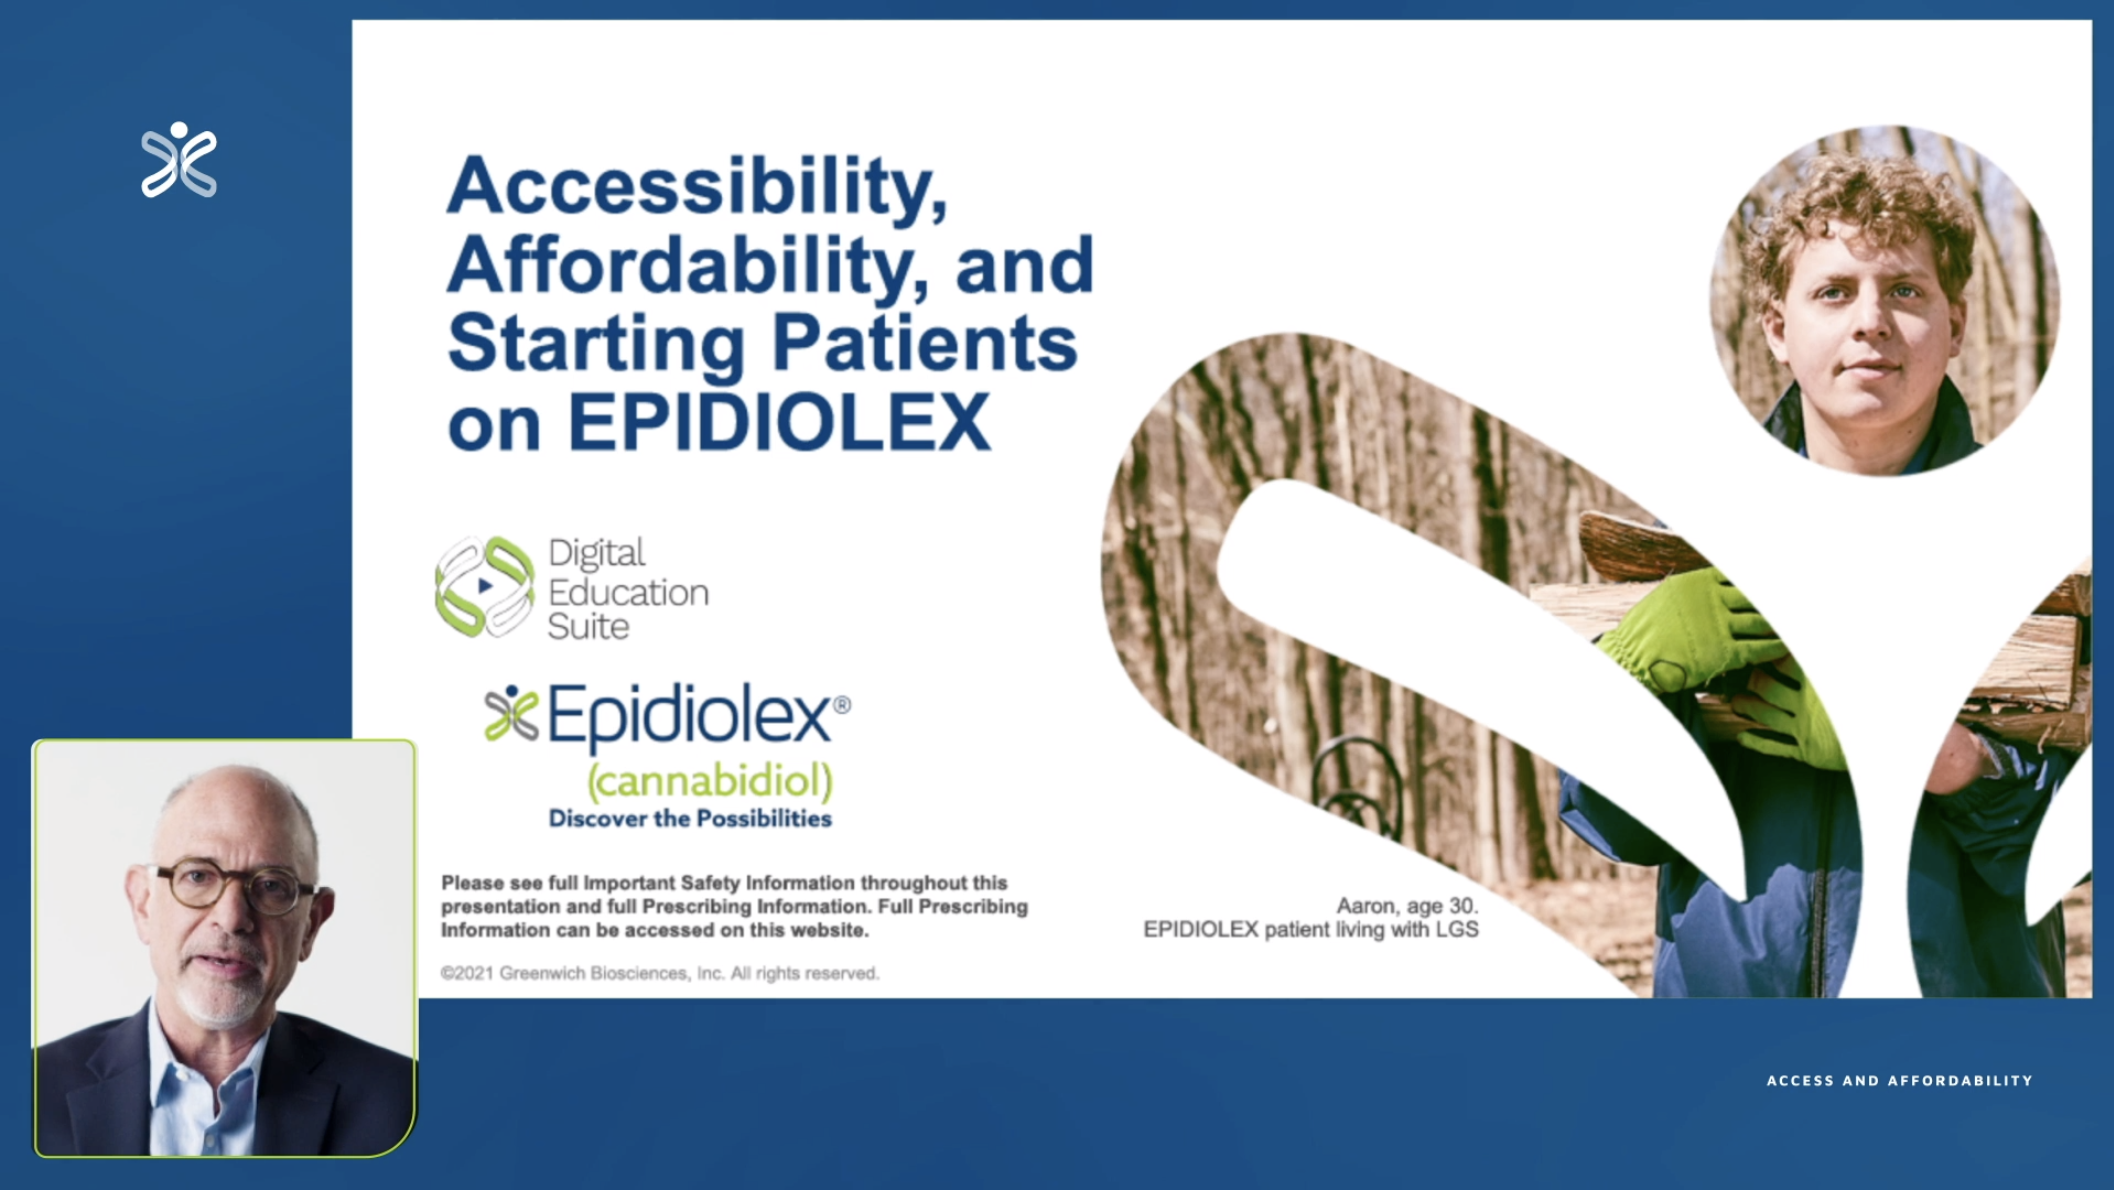 Dr. Flamini discusses the improved EPIDIOLEX coverage available, helping your patients get started on treatment.